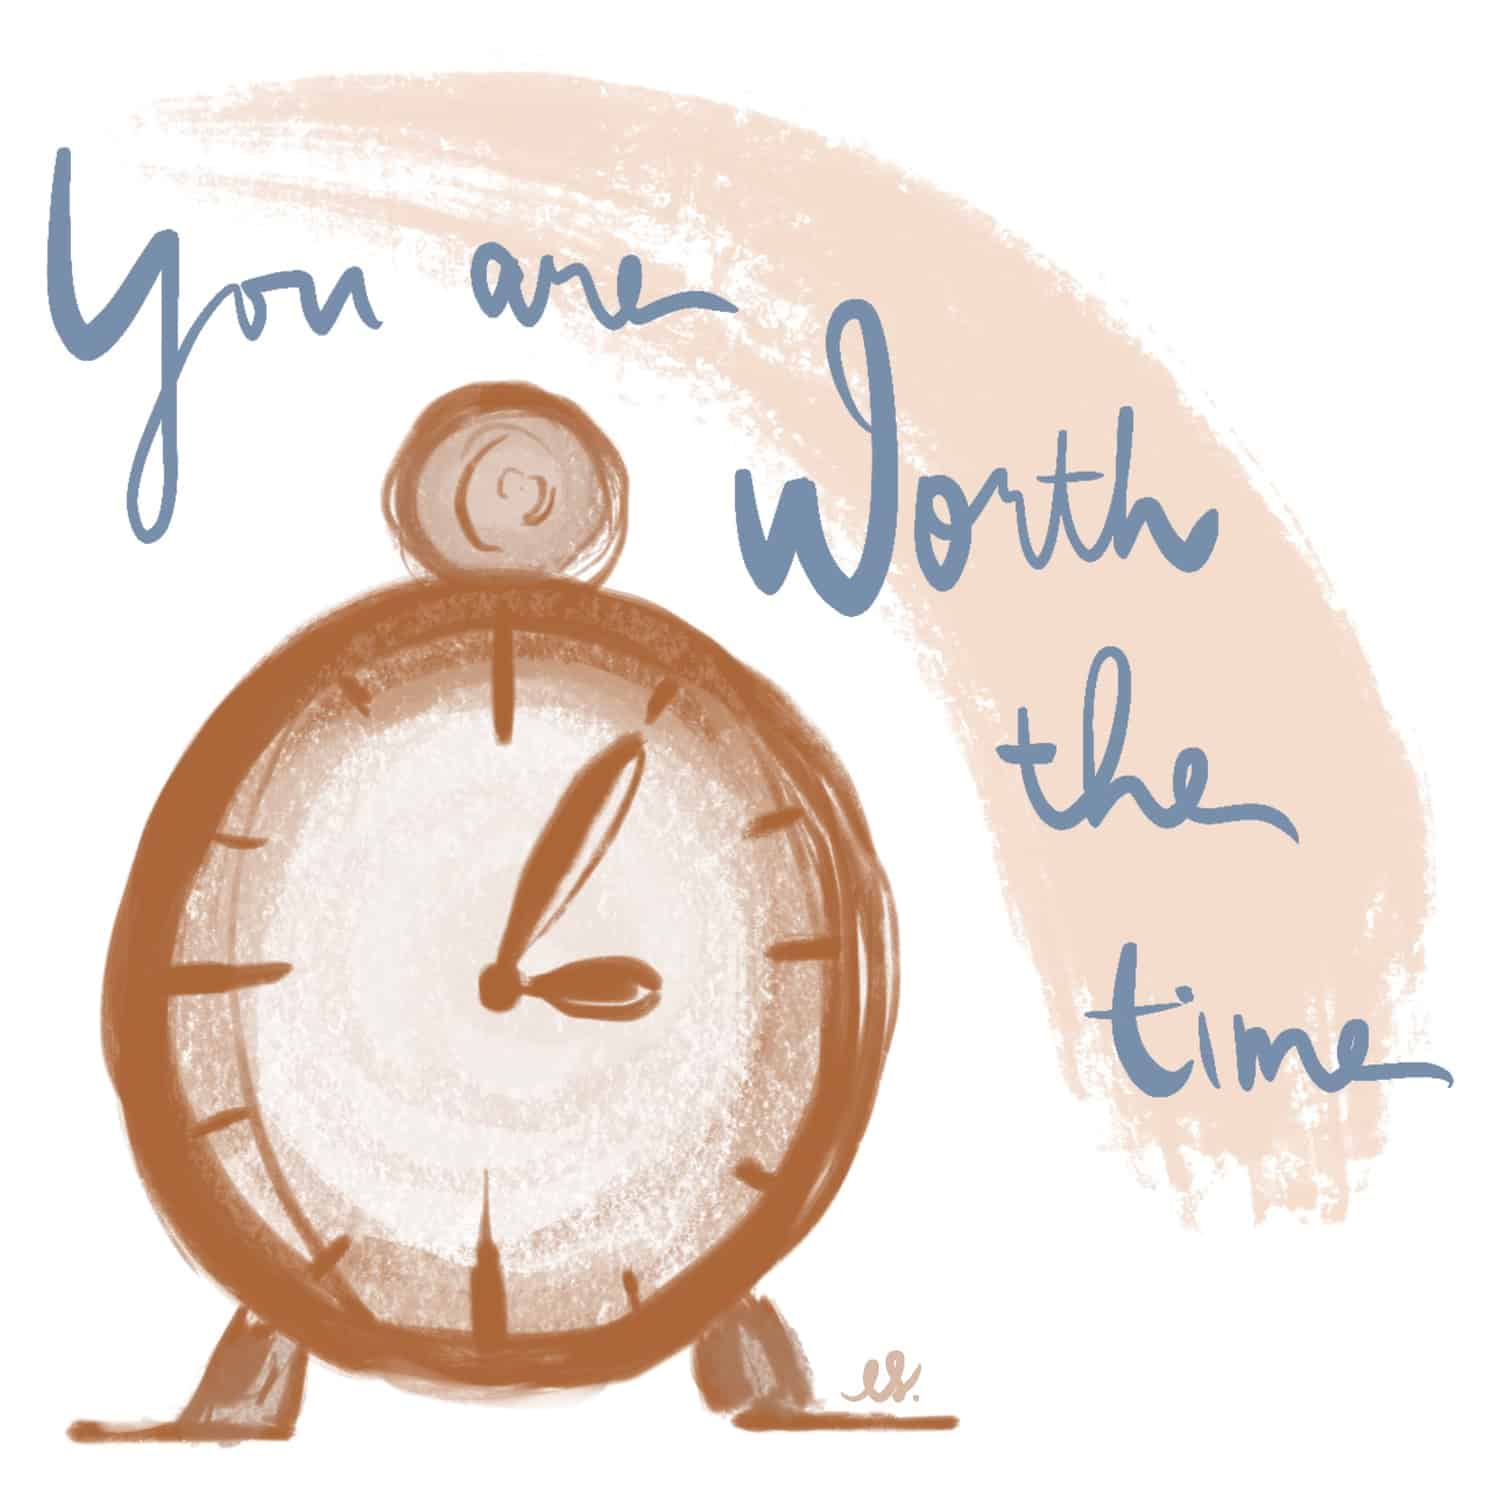 You are Worth the Time and Effort